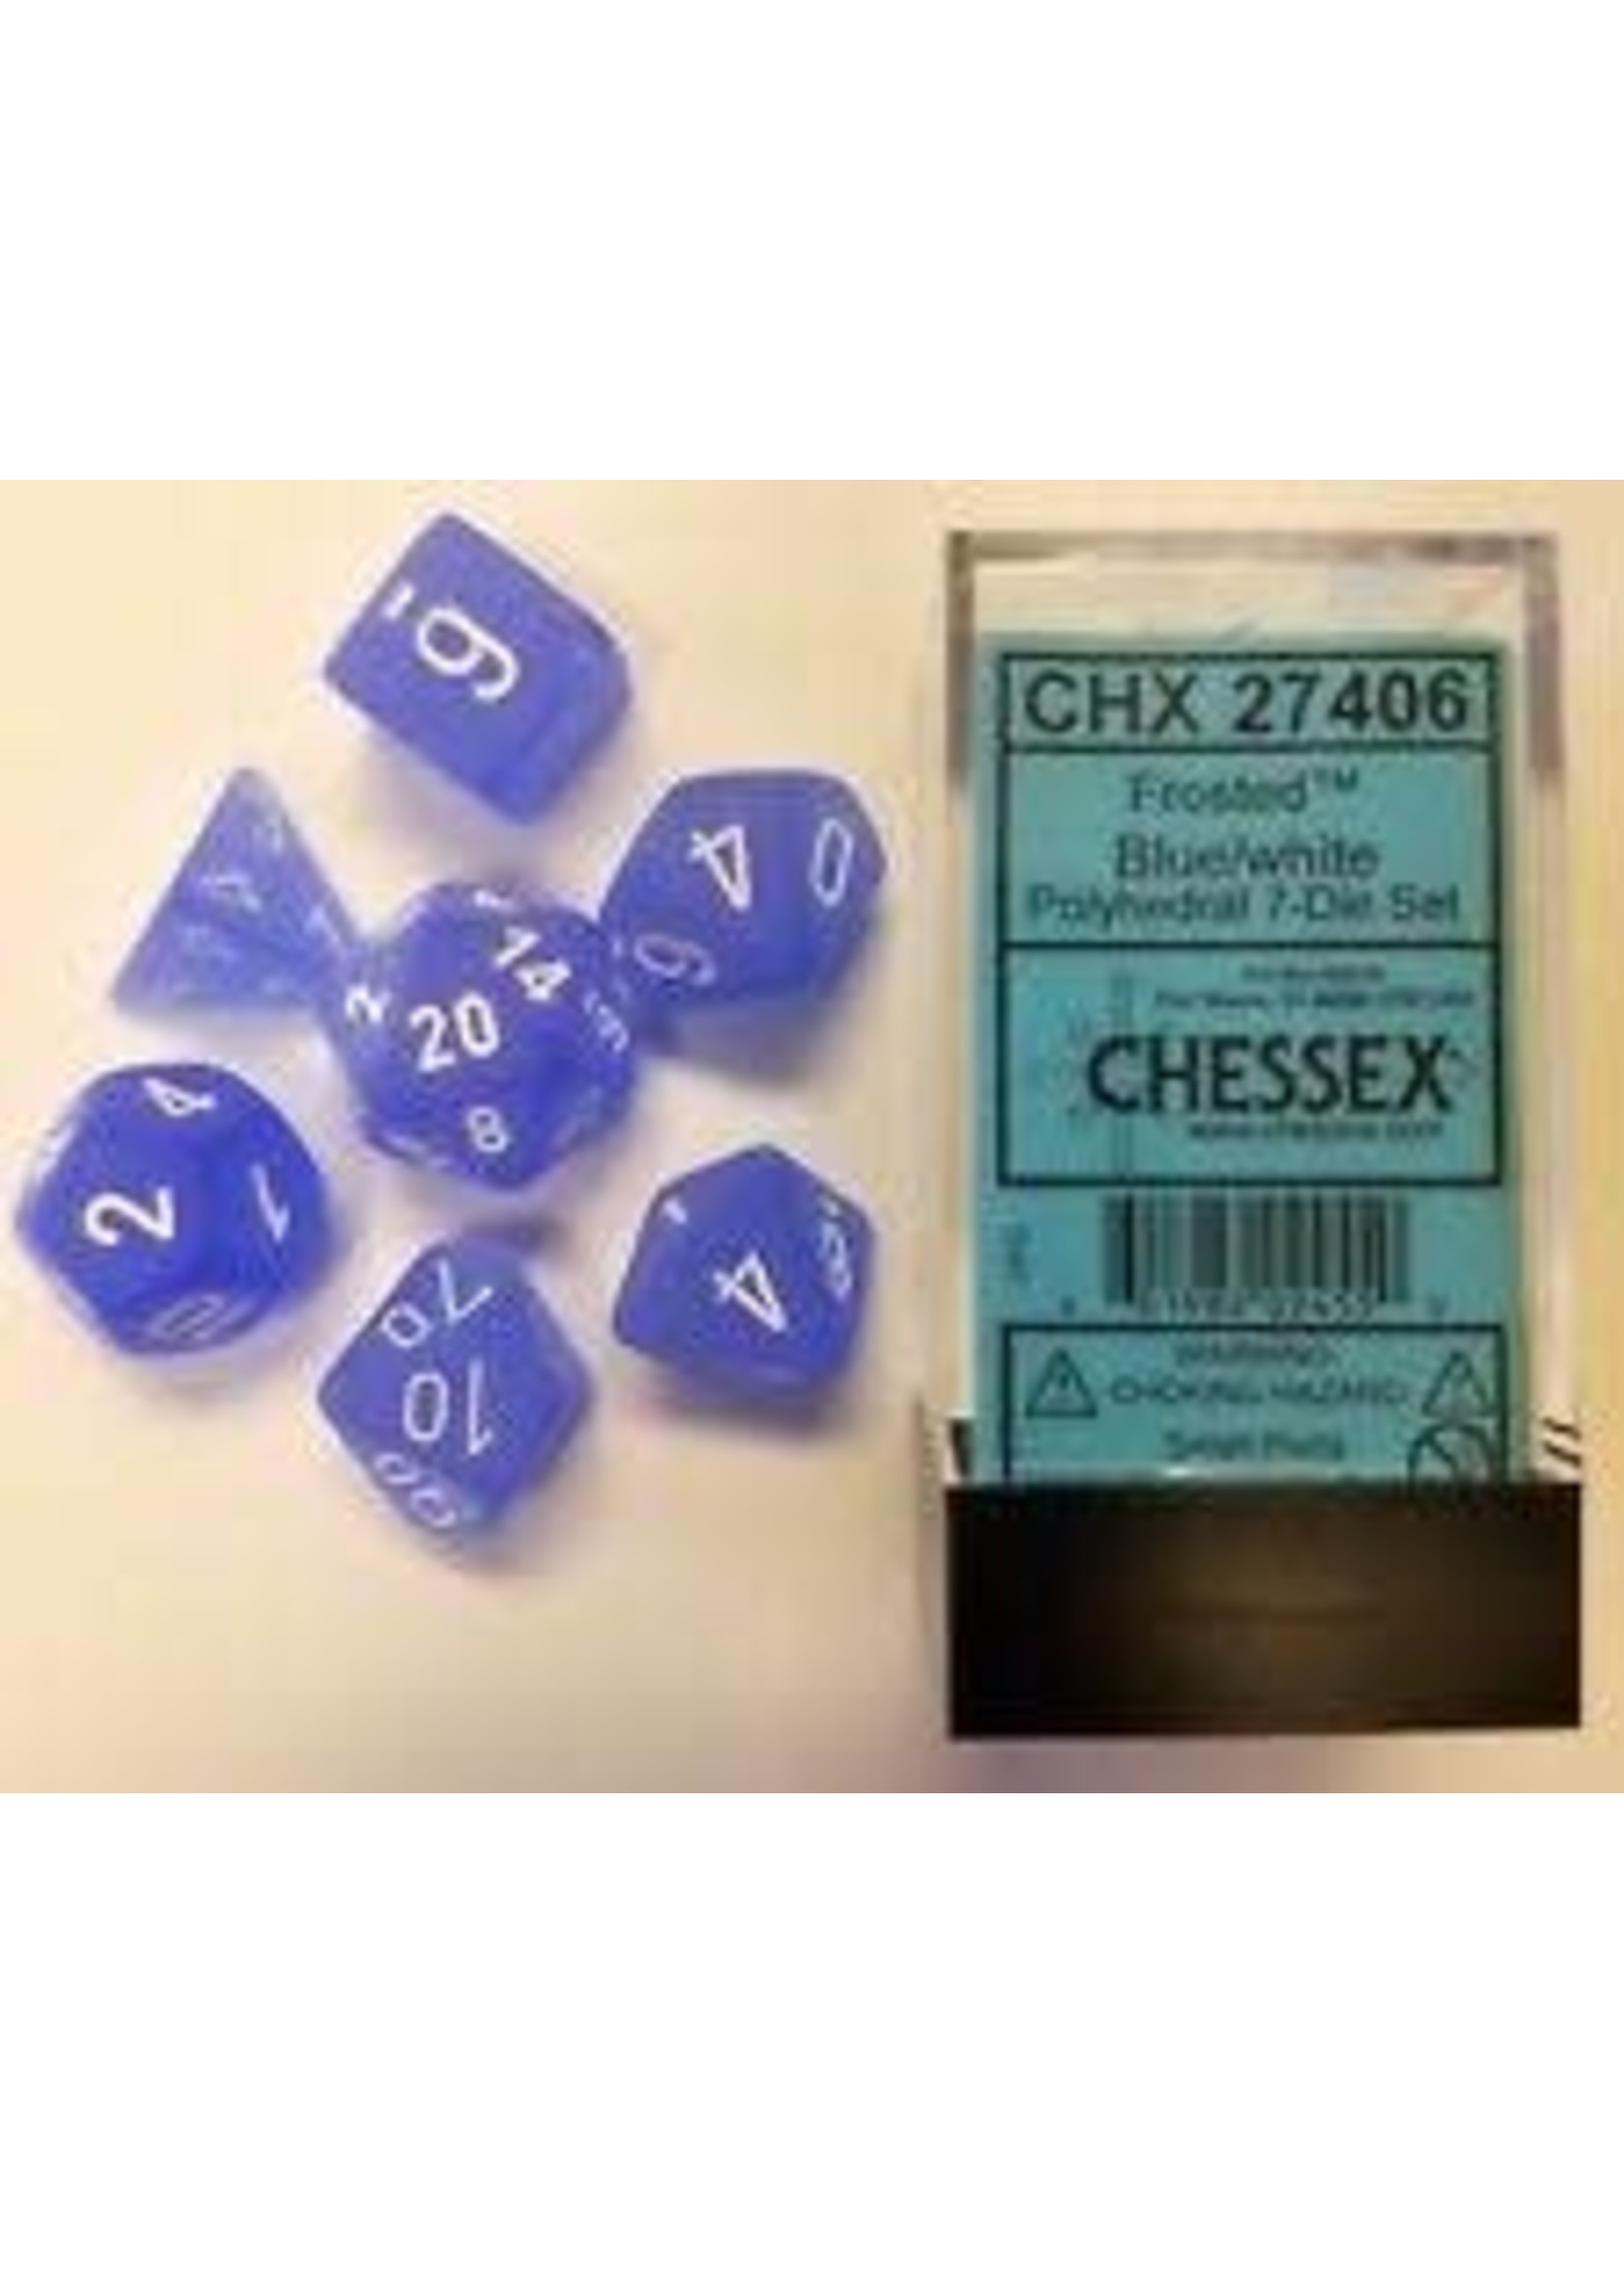 Chessex Frosted Poly 7 set: Blue w/ White